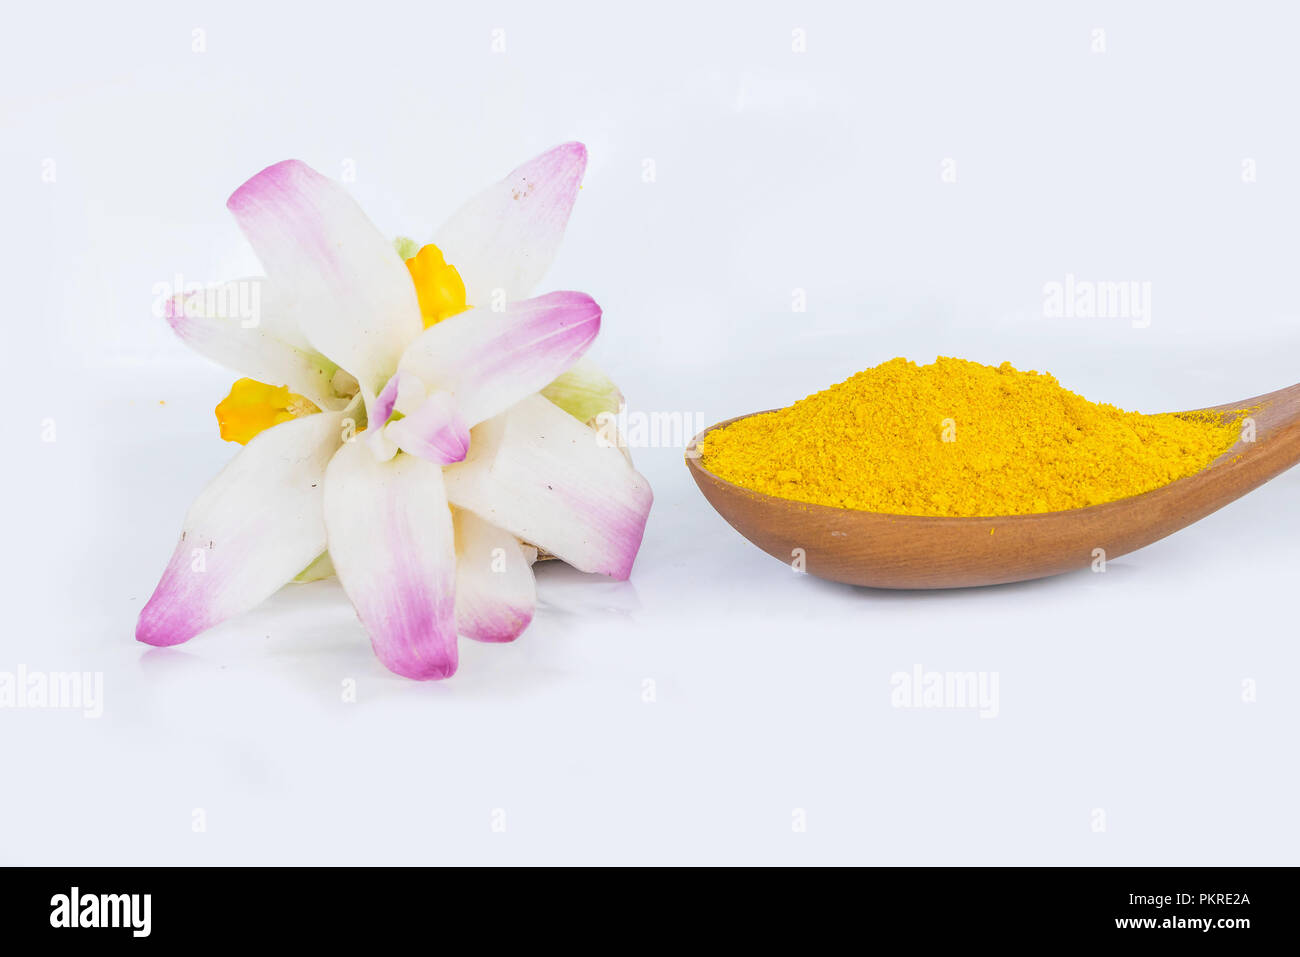 Turmeric powder on the wooden spoon, Zingiber,Turmeric root, Cassumunar ginger, Bengal root,Zingiberaceae,and tumeric flower on the white background.  Stock Photo